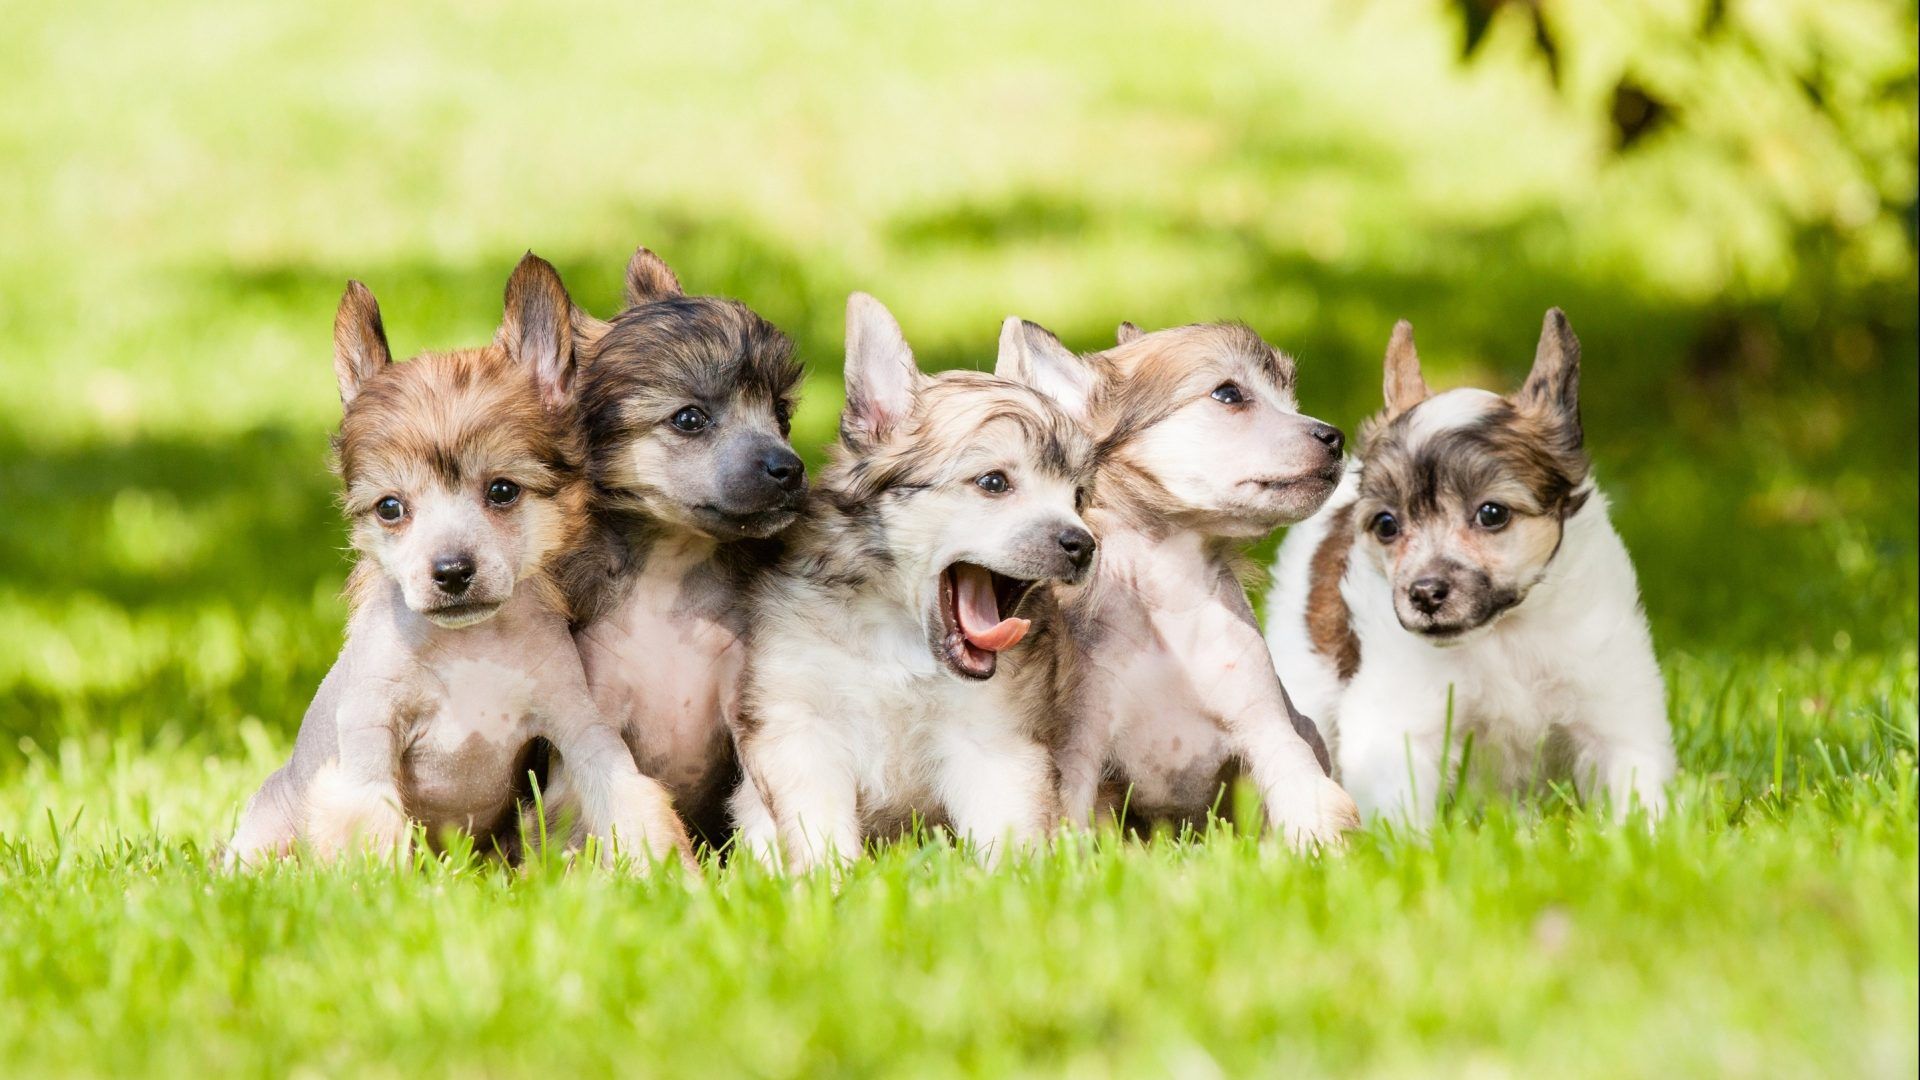 Cute Dogs and Puppies Wallpaper New Tab